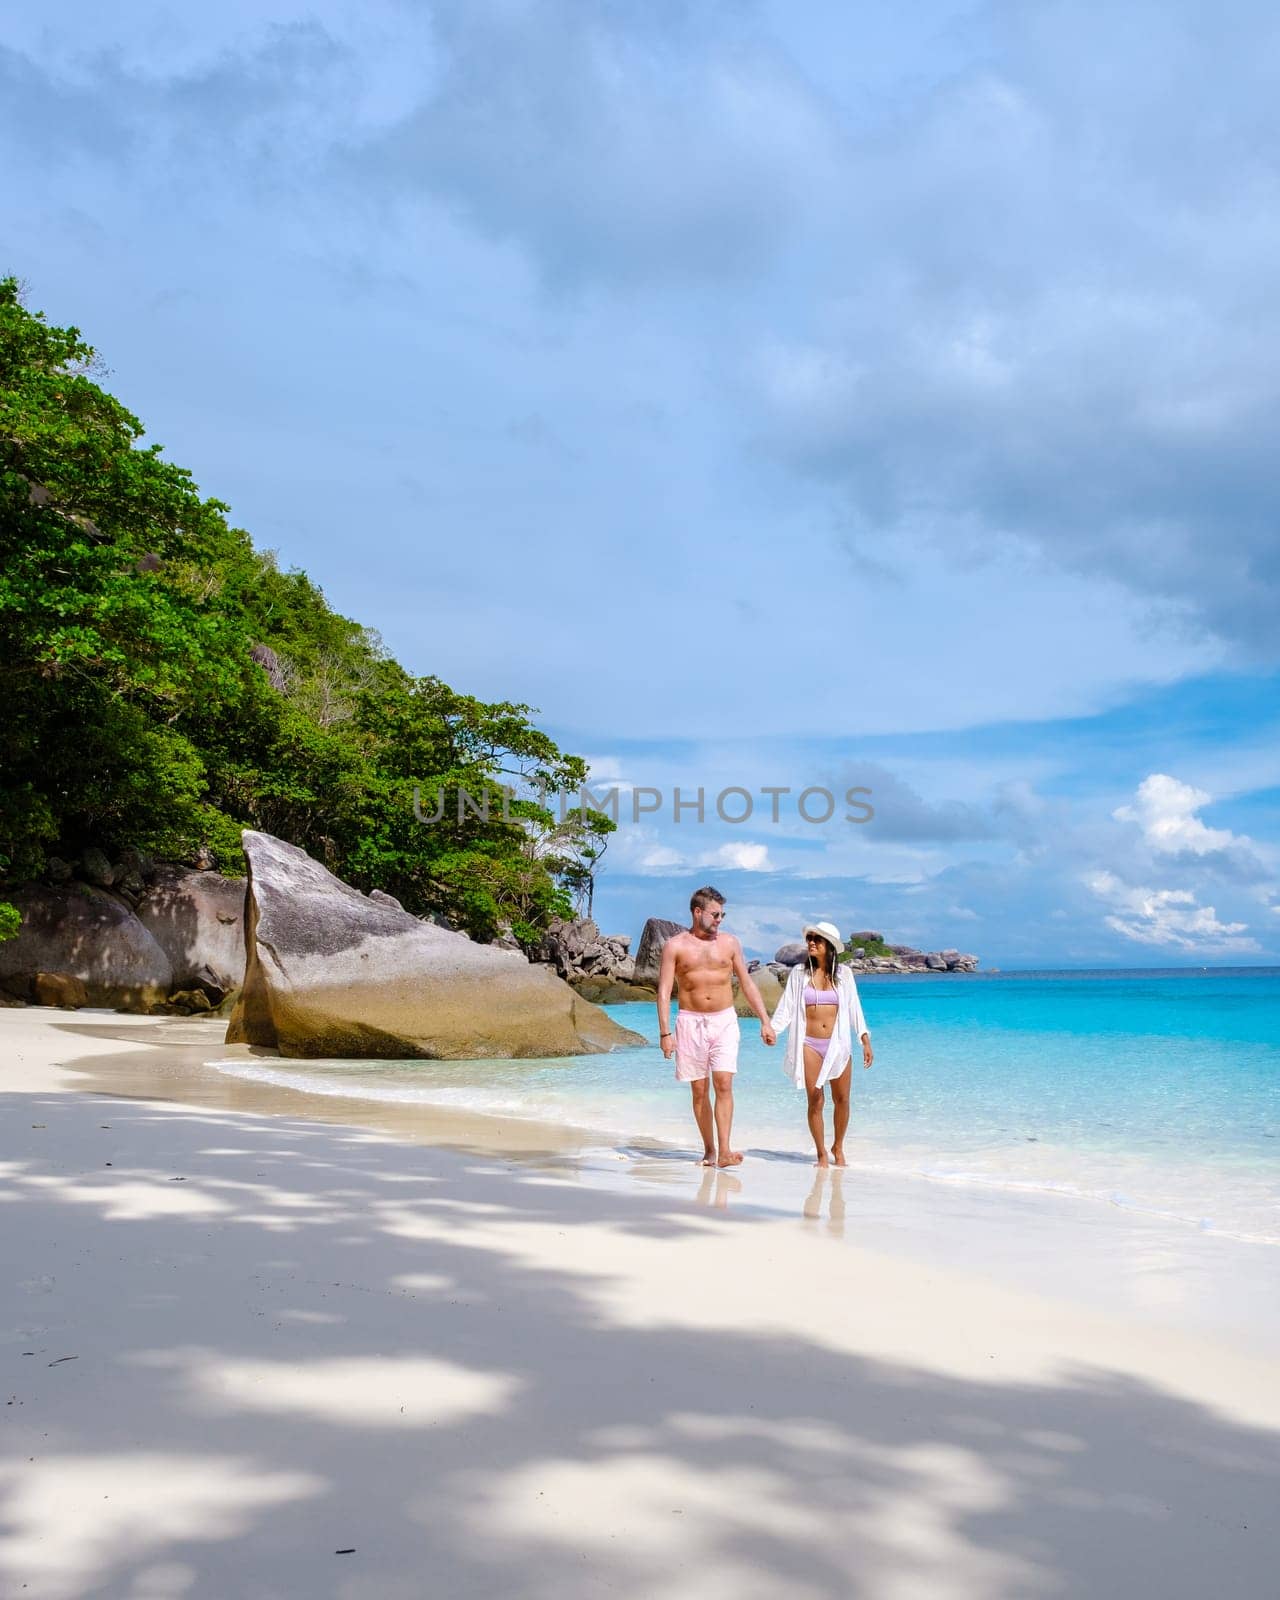 A couple of women and men relaxing on the beach in the sun at the Similan Islands in Thailand Phannga. couple visit the Similan Islands on a boat trip during vacation